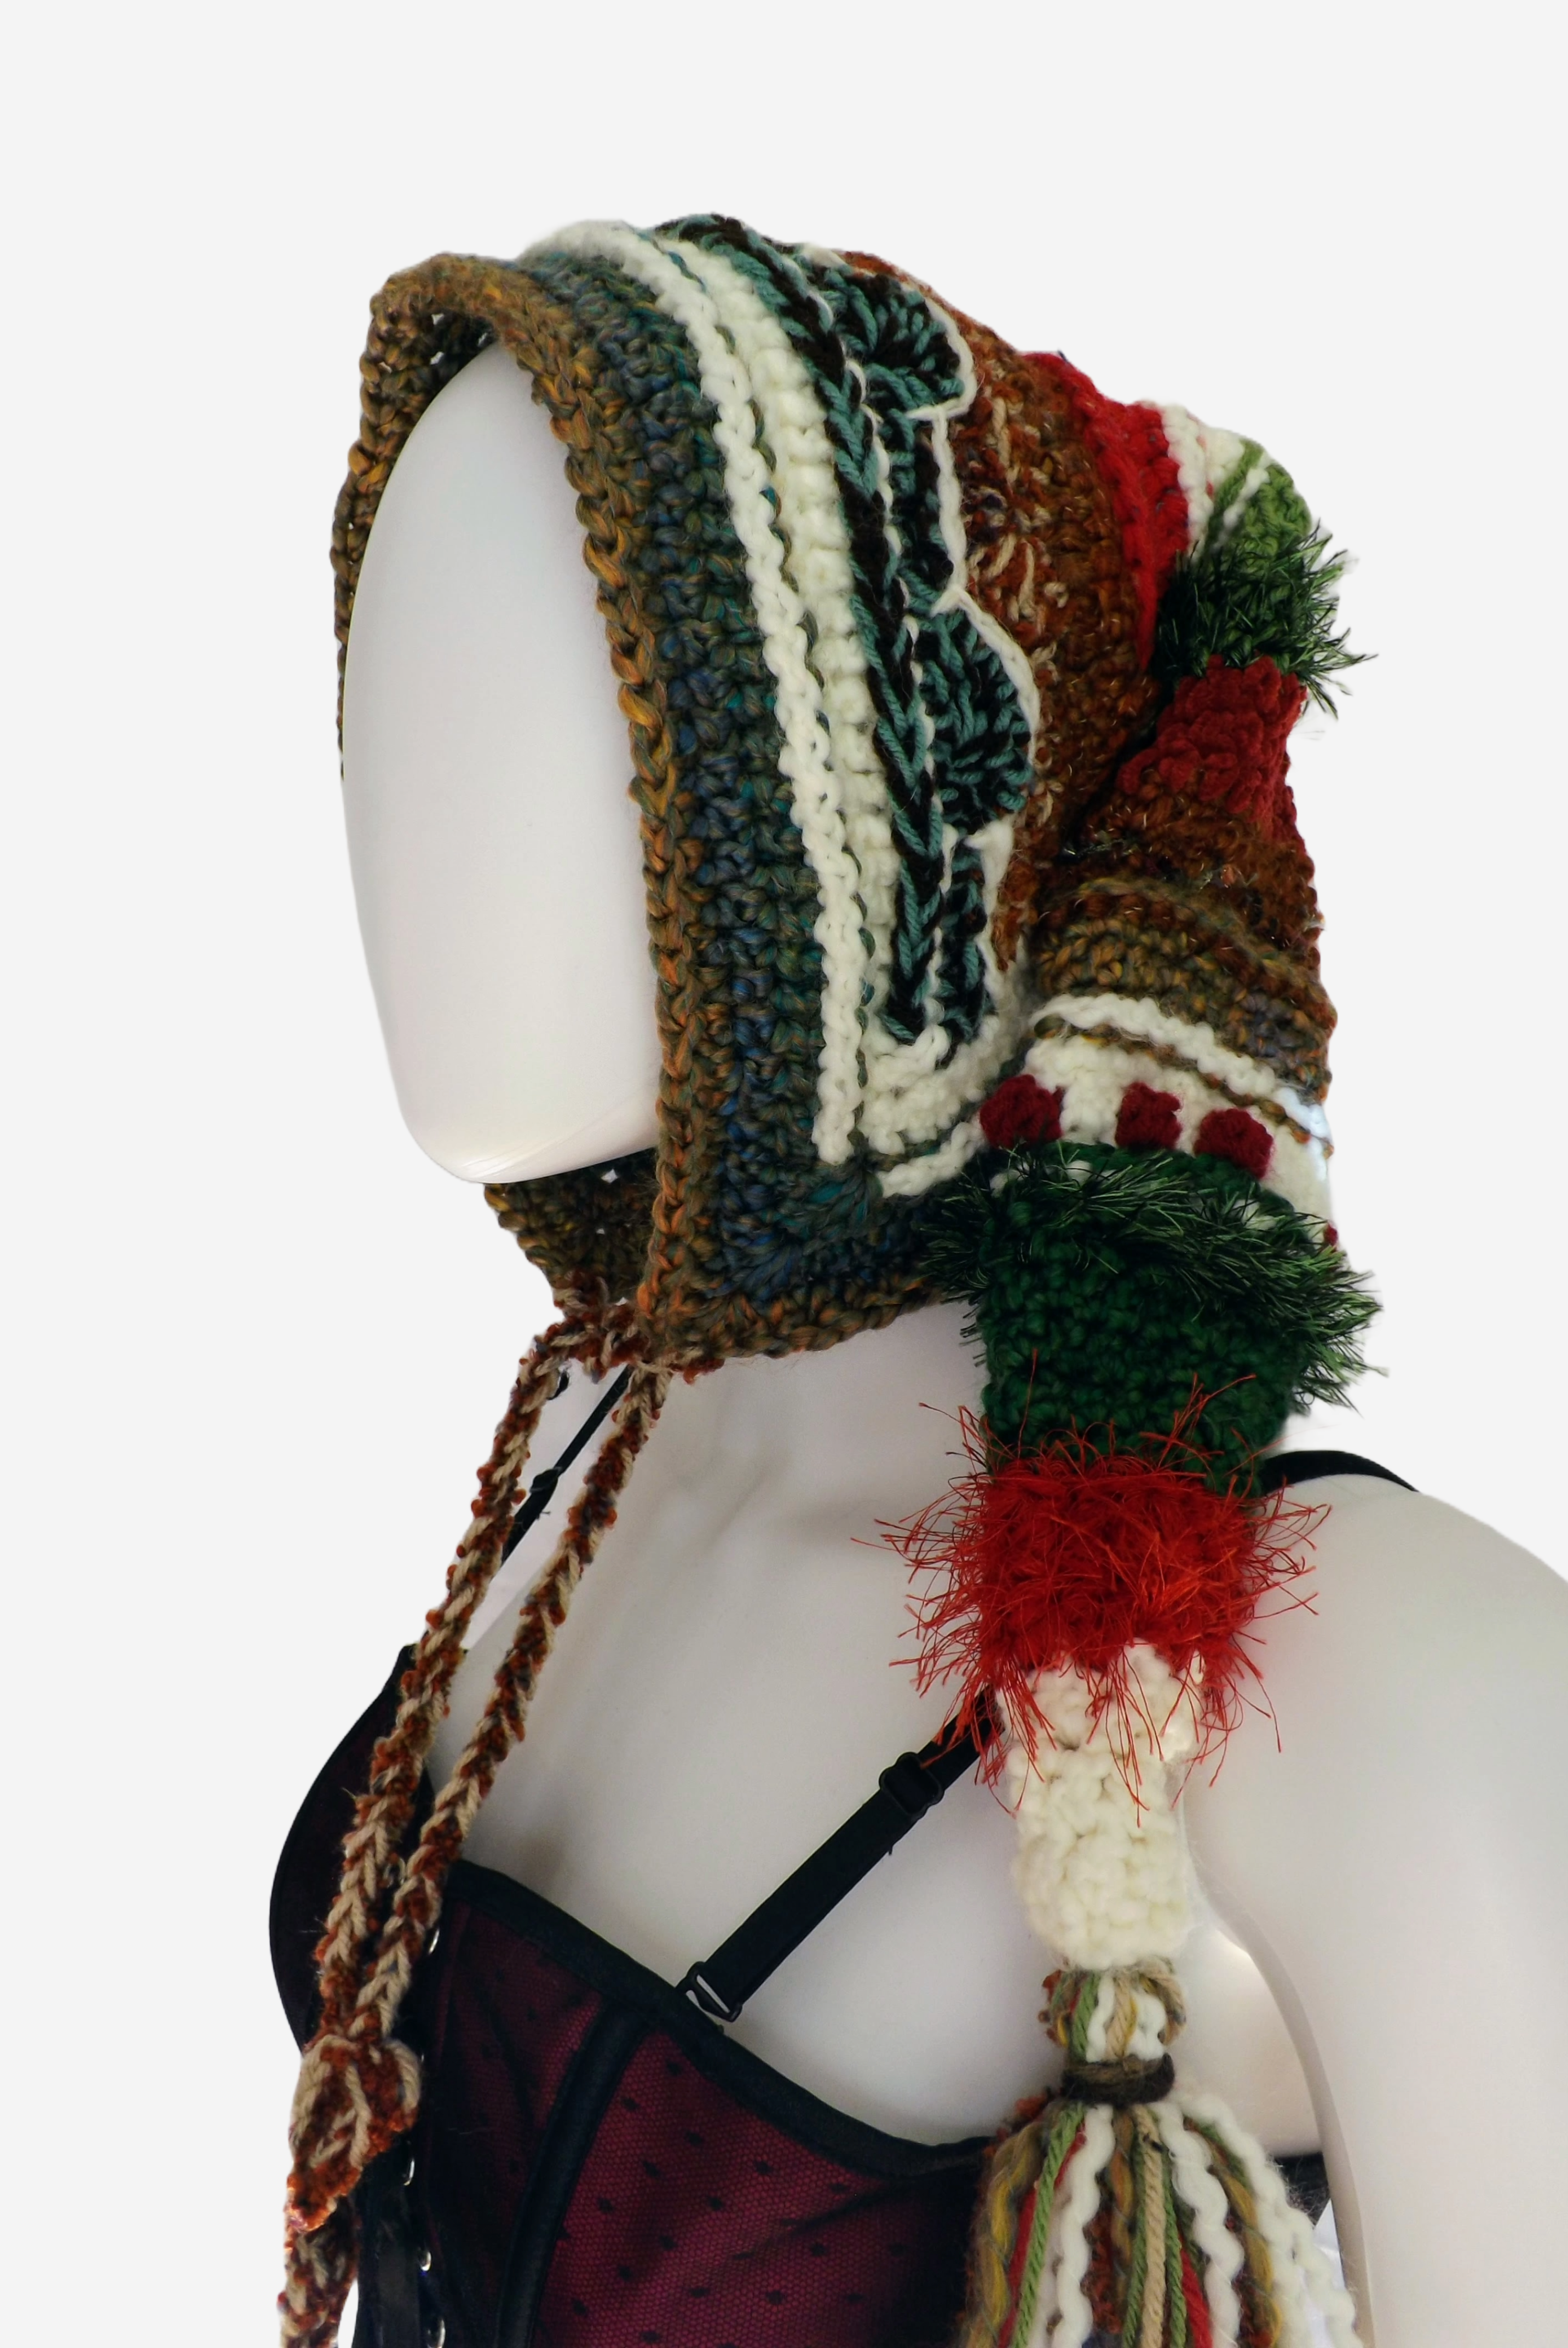 Crochet elf hood in browns, greens, reds and white has a long stocking cap and tassel end